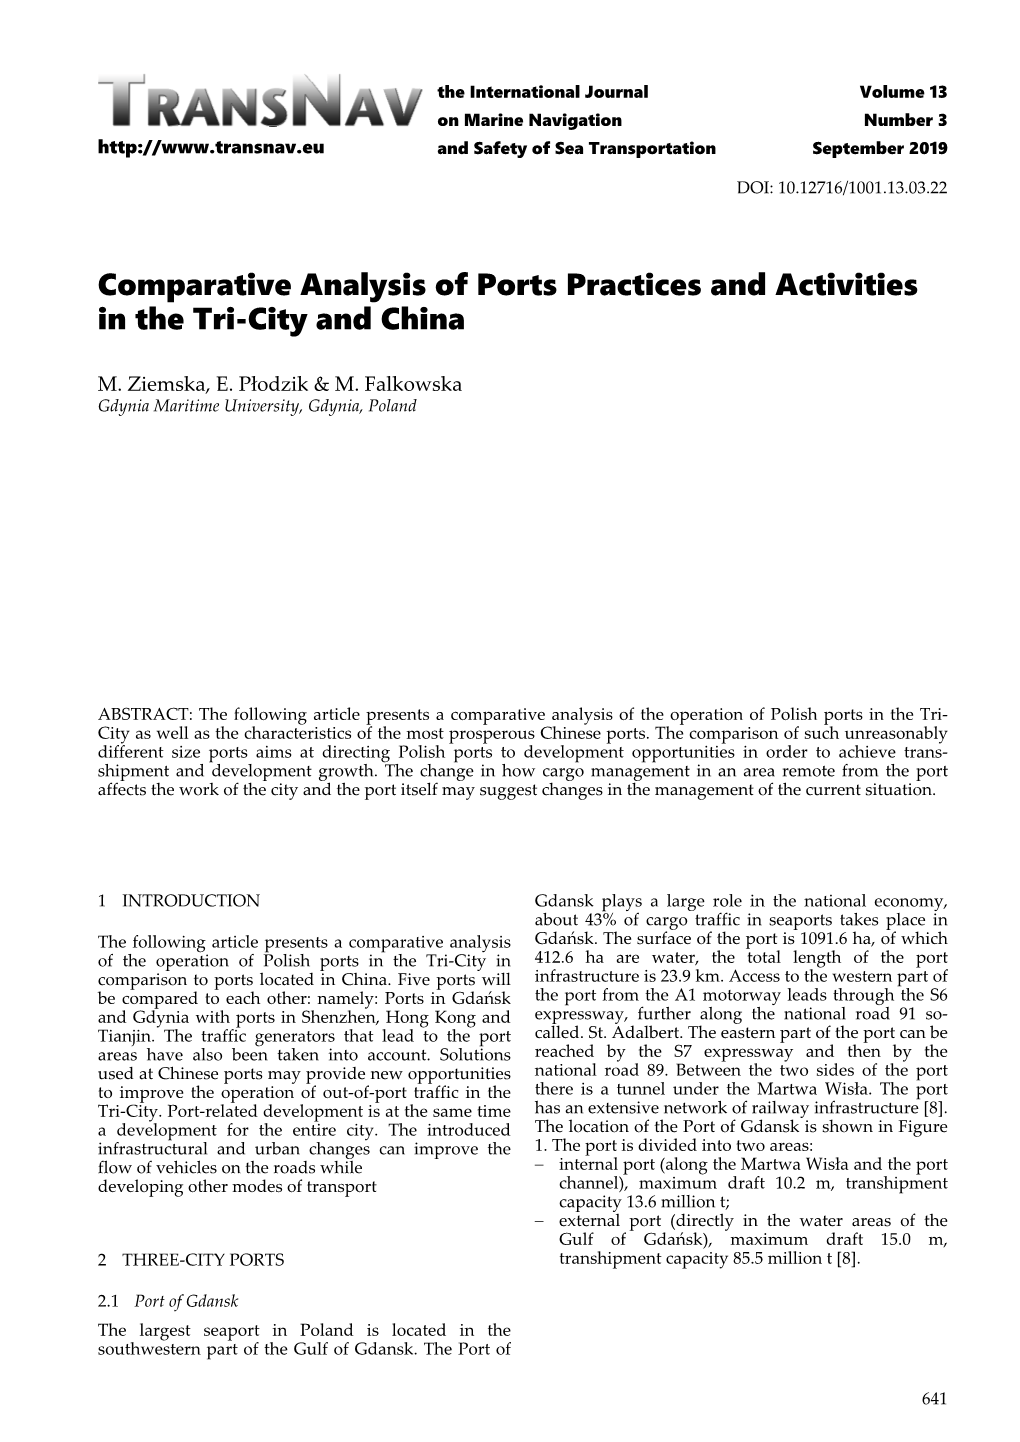 Comparative Analysis of Ports Practices and Activities in the Tri-City and China